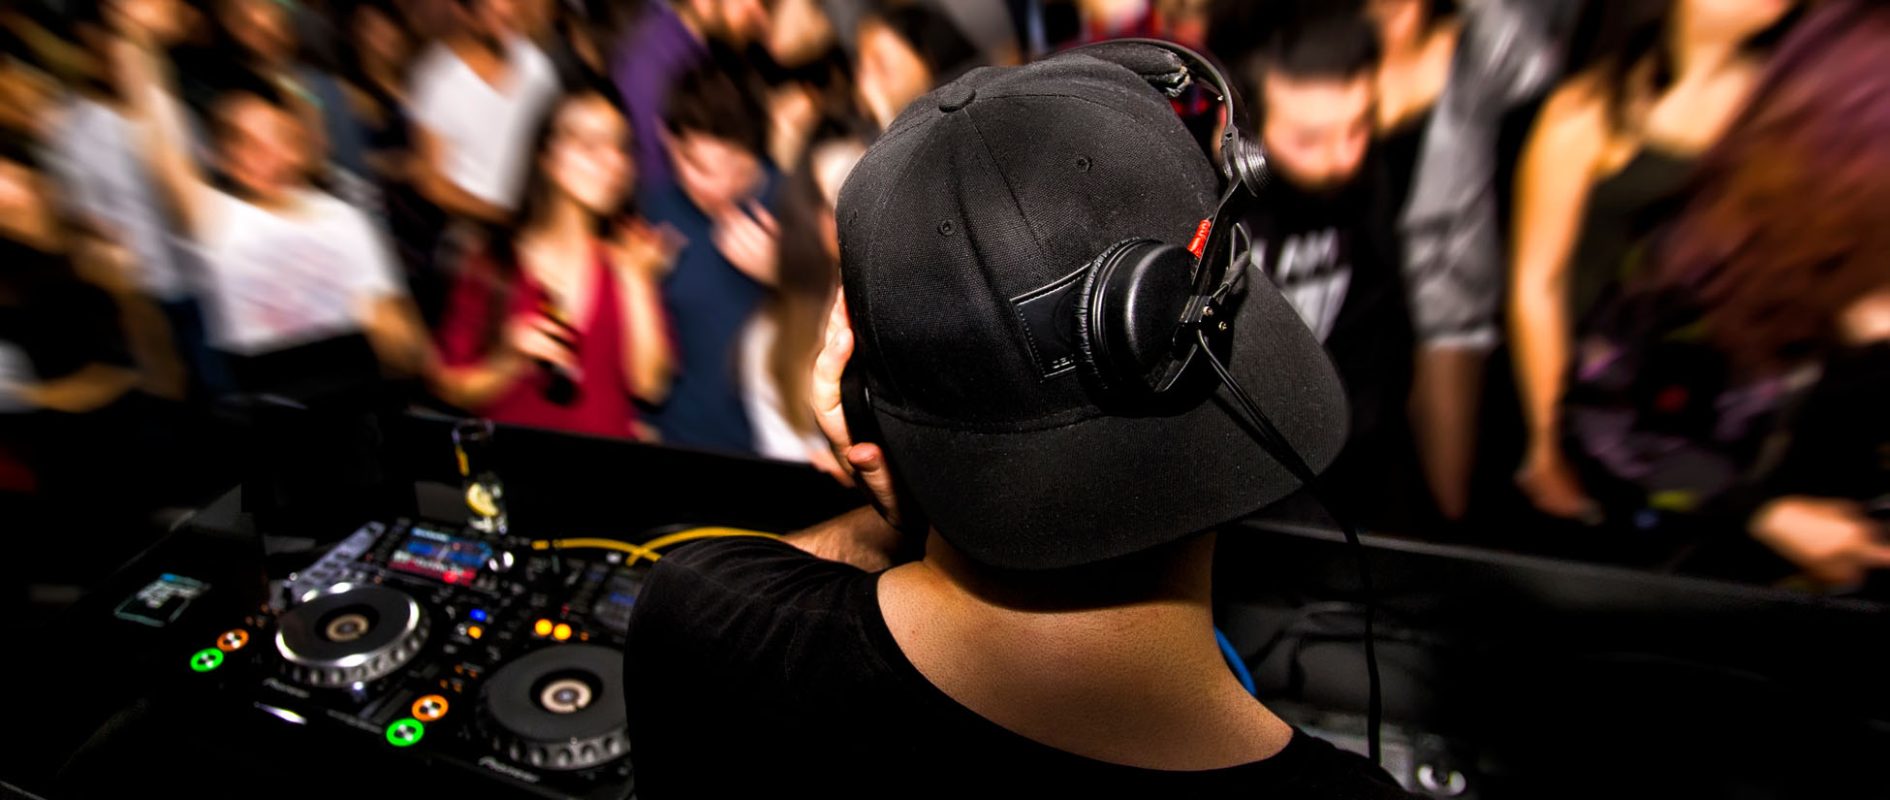 DJ with headphone and dj set at night club party. People at the